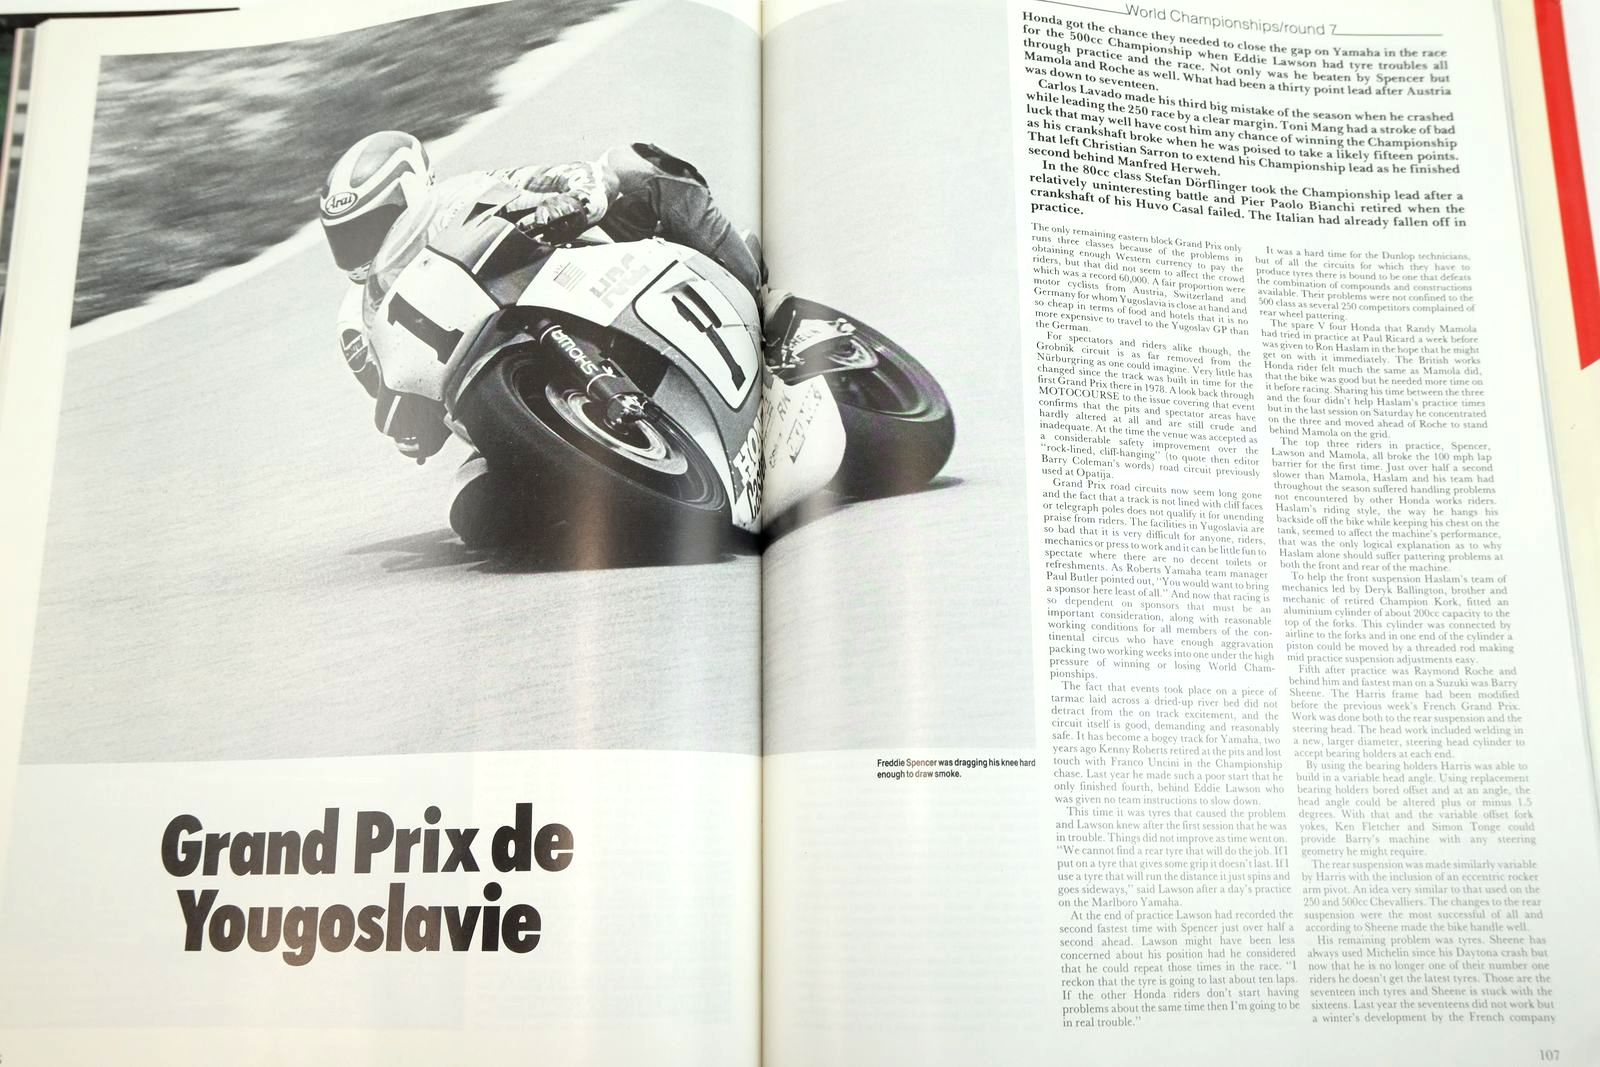 Photo of MOTOCOURSE 1984-85 published by Hazleton Publishing (STOCK CODE: 2135143)  for sale by Stella & Rose's Books